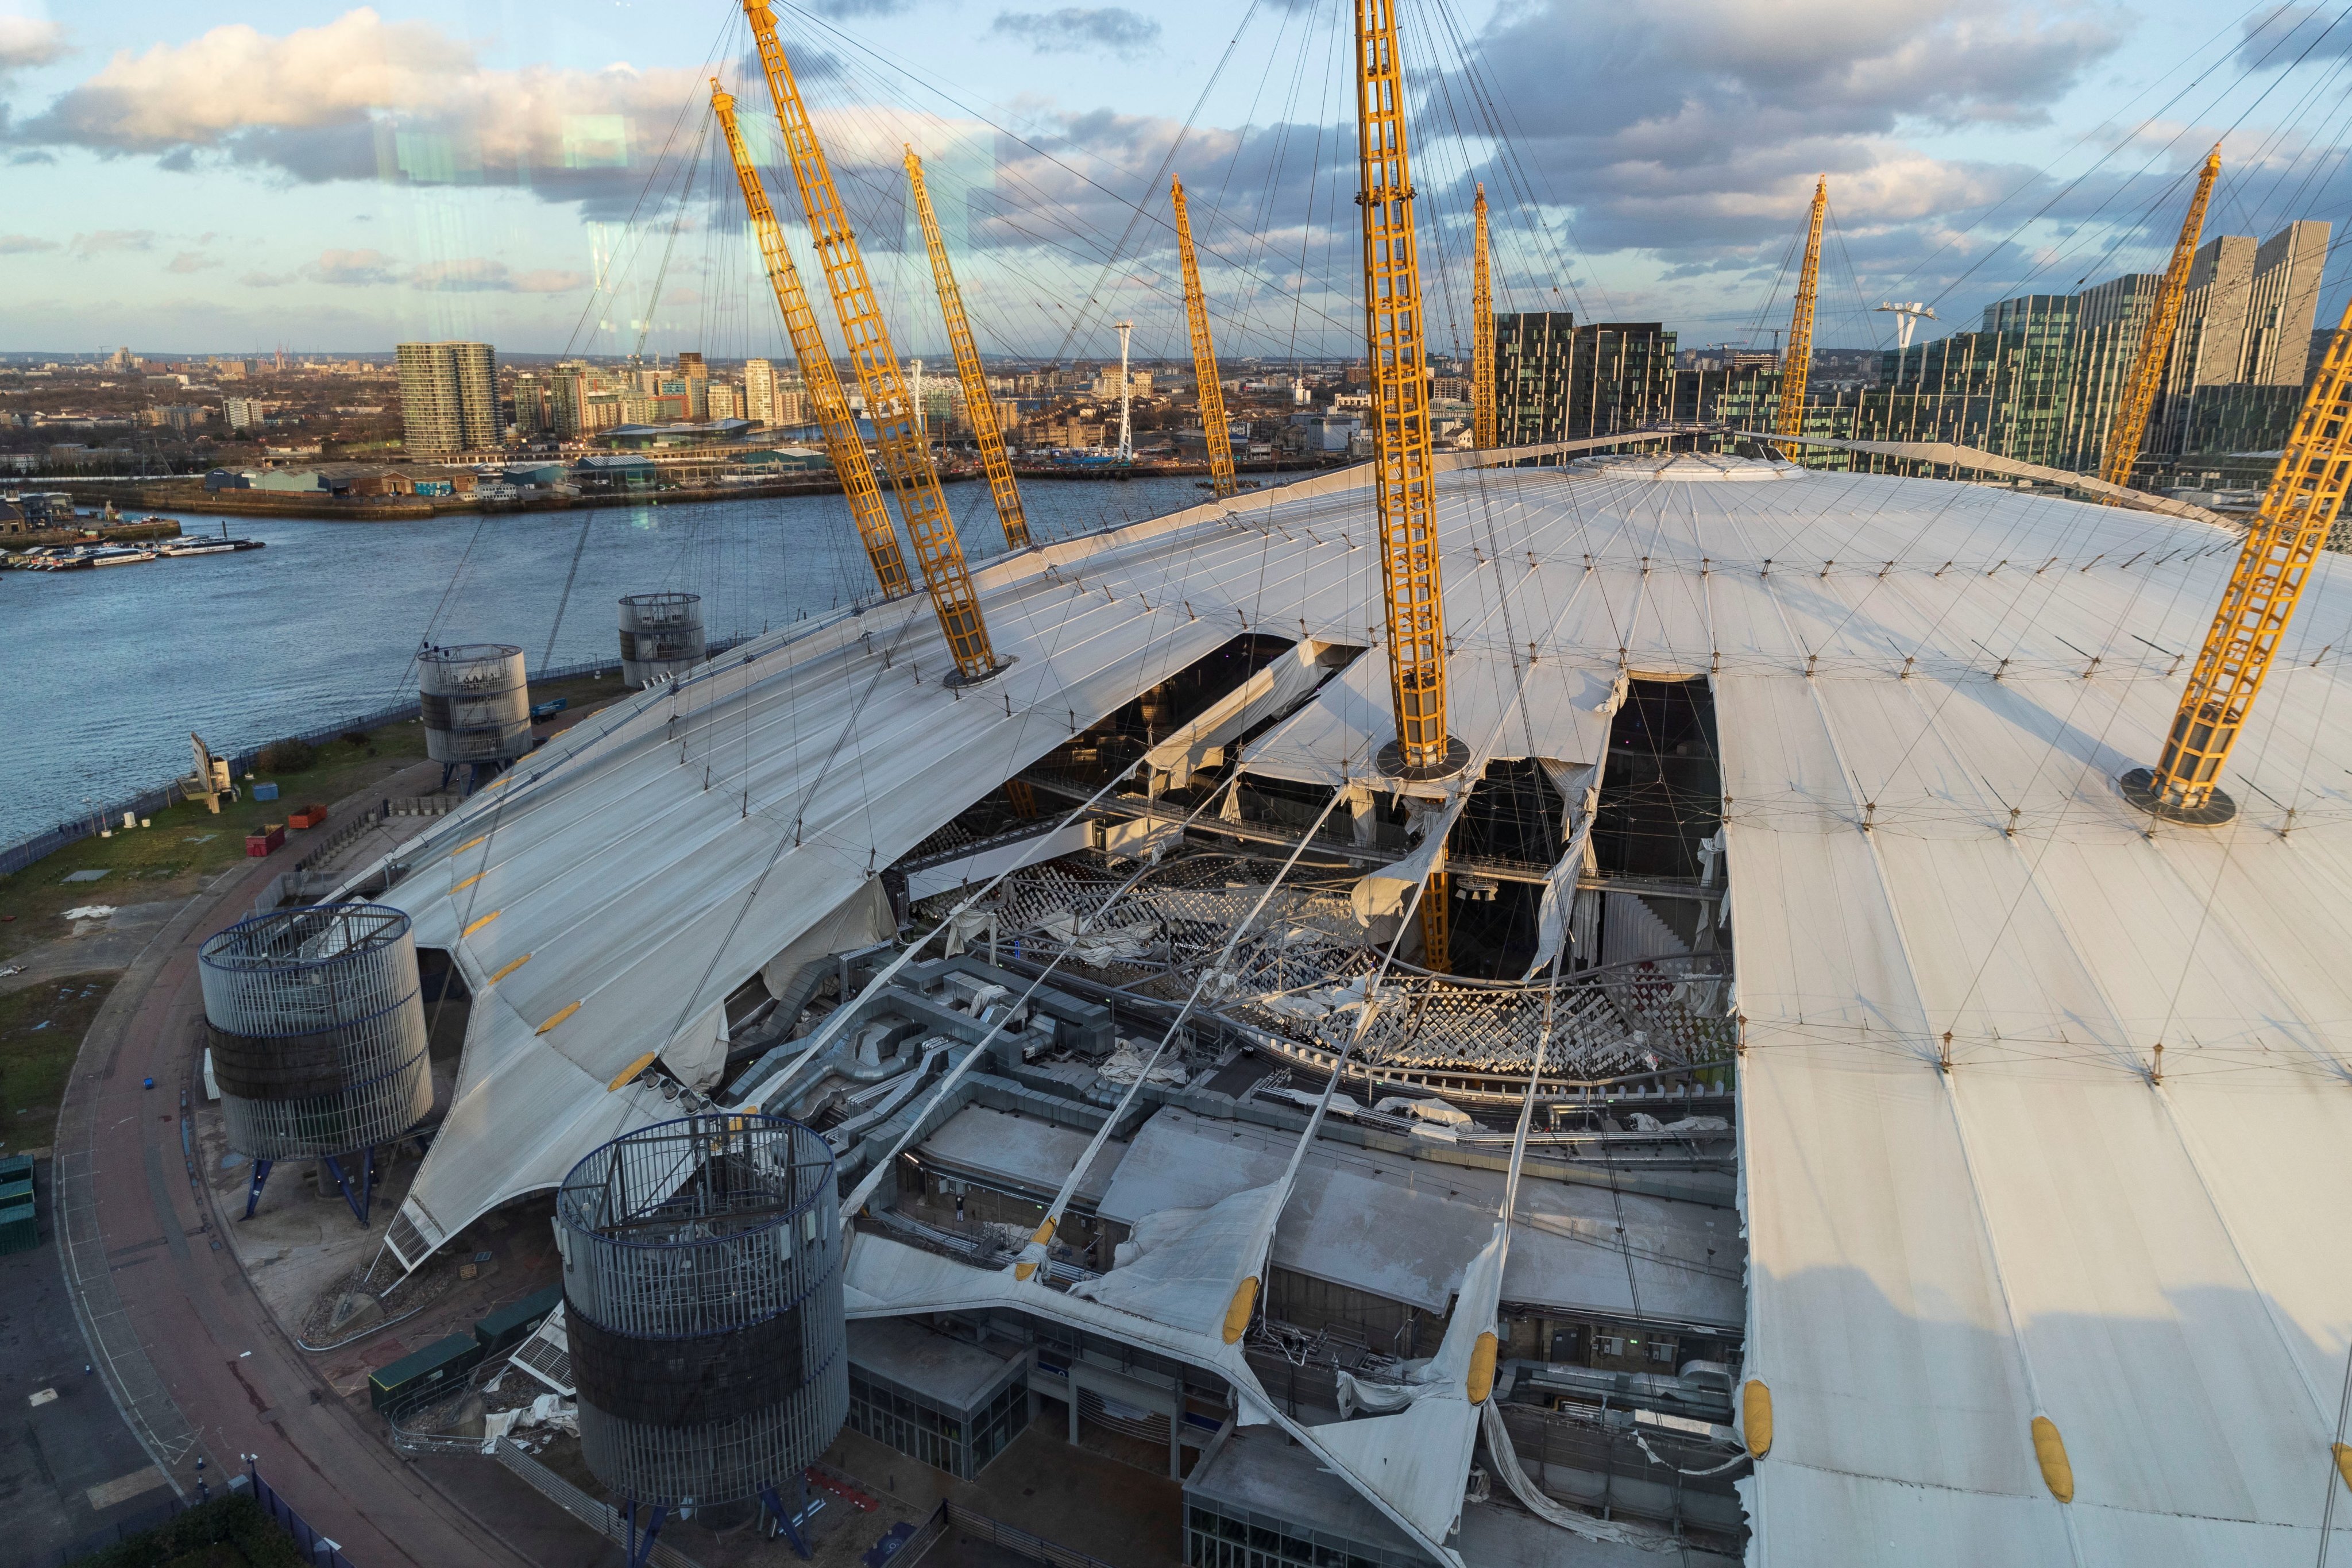 The roof of the O2 arena seen damaged by the wind, as a red weather warning was issued in London on Friday. Photo: Reuters